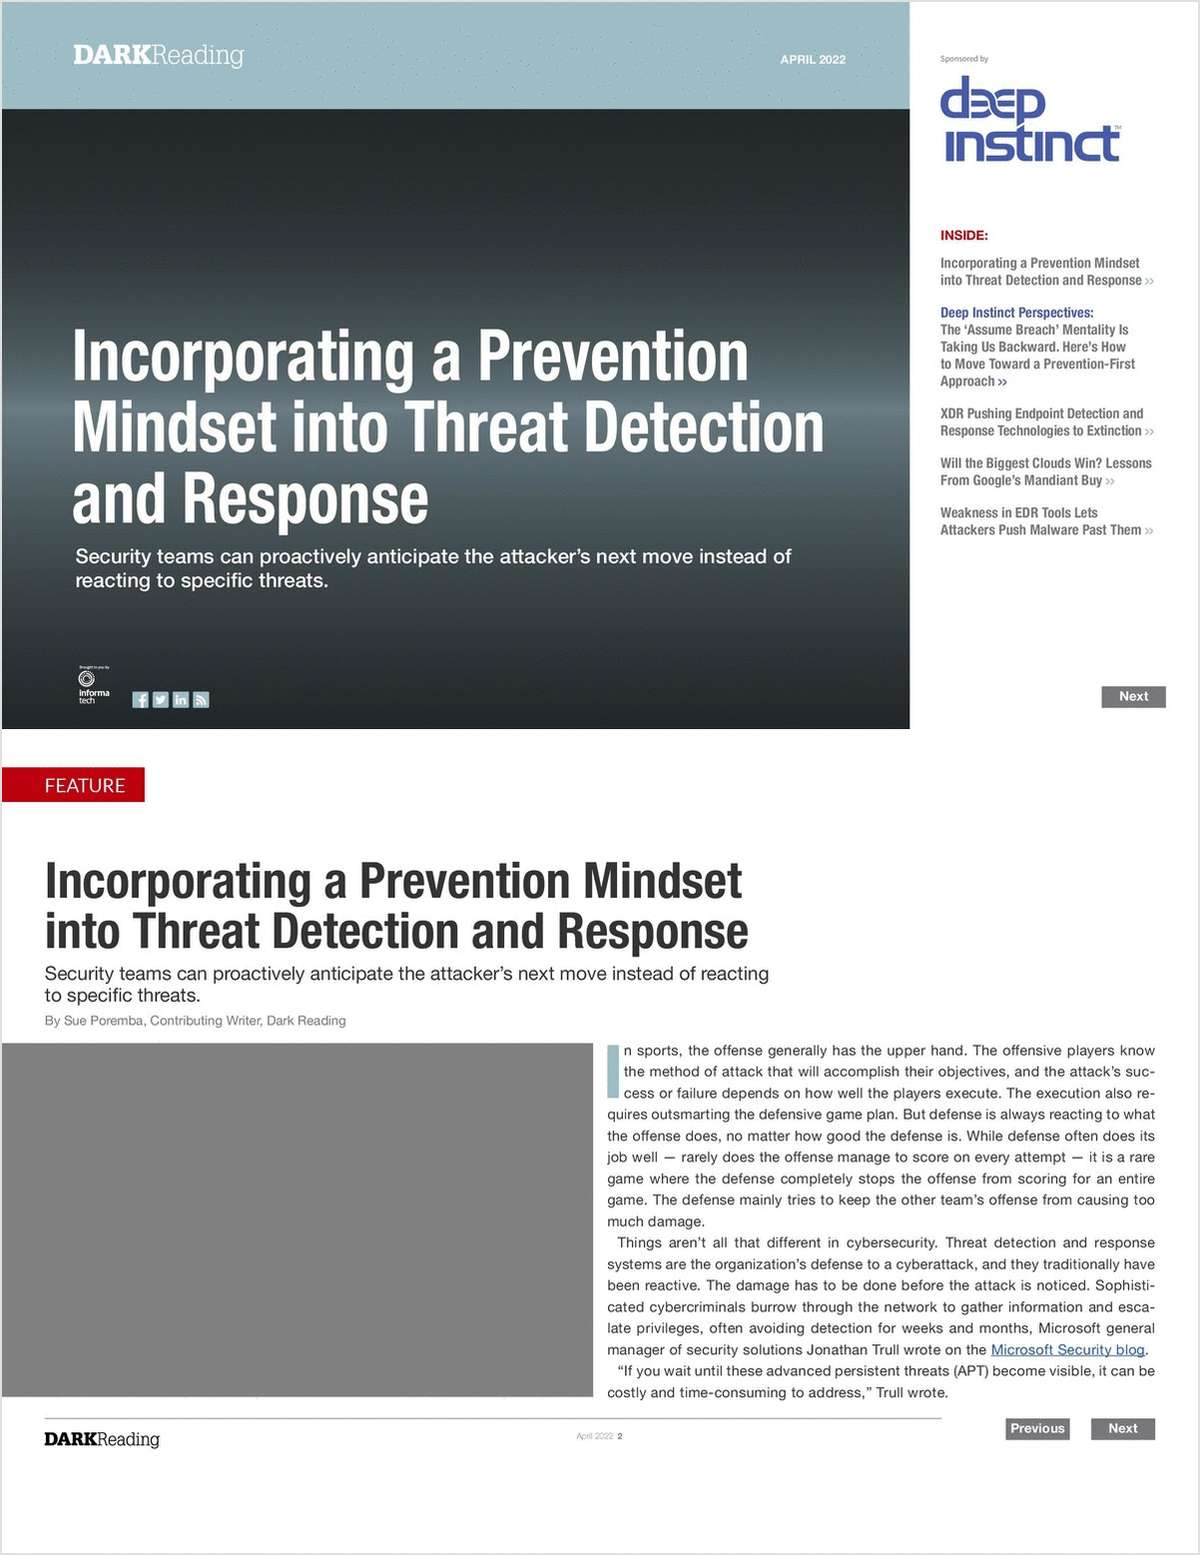 Incorporating a Prevention Mindset into Threat Detection and Response